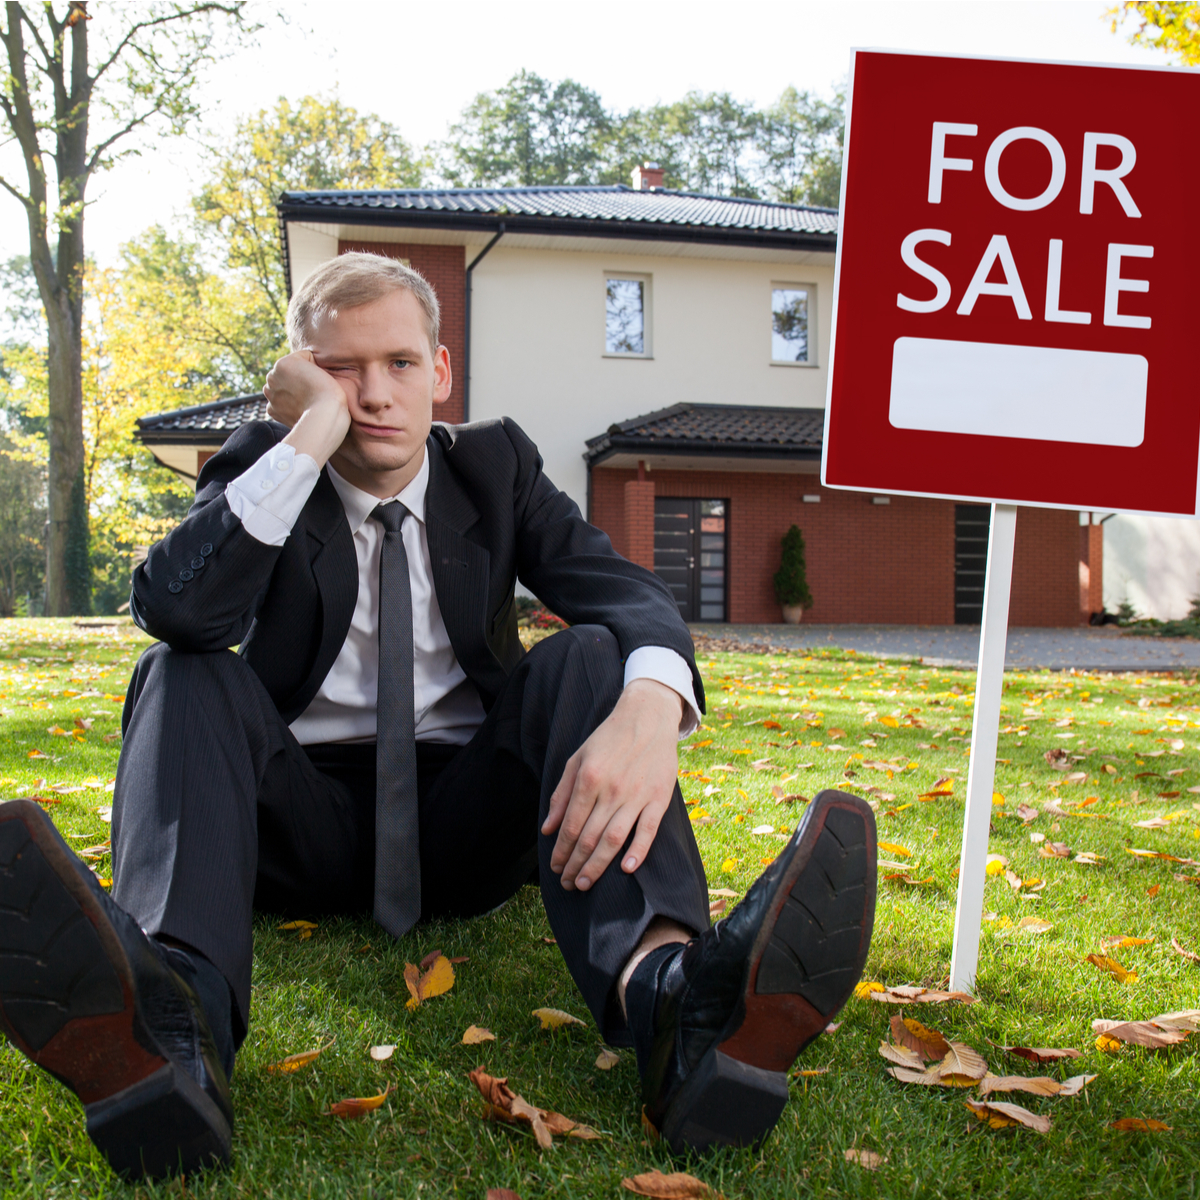 a realtor sitting on the grass next to a for sale sign in front of a house for sale